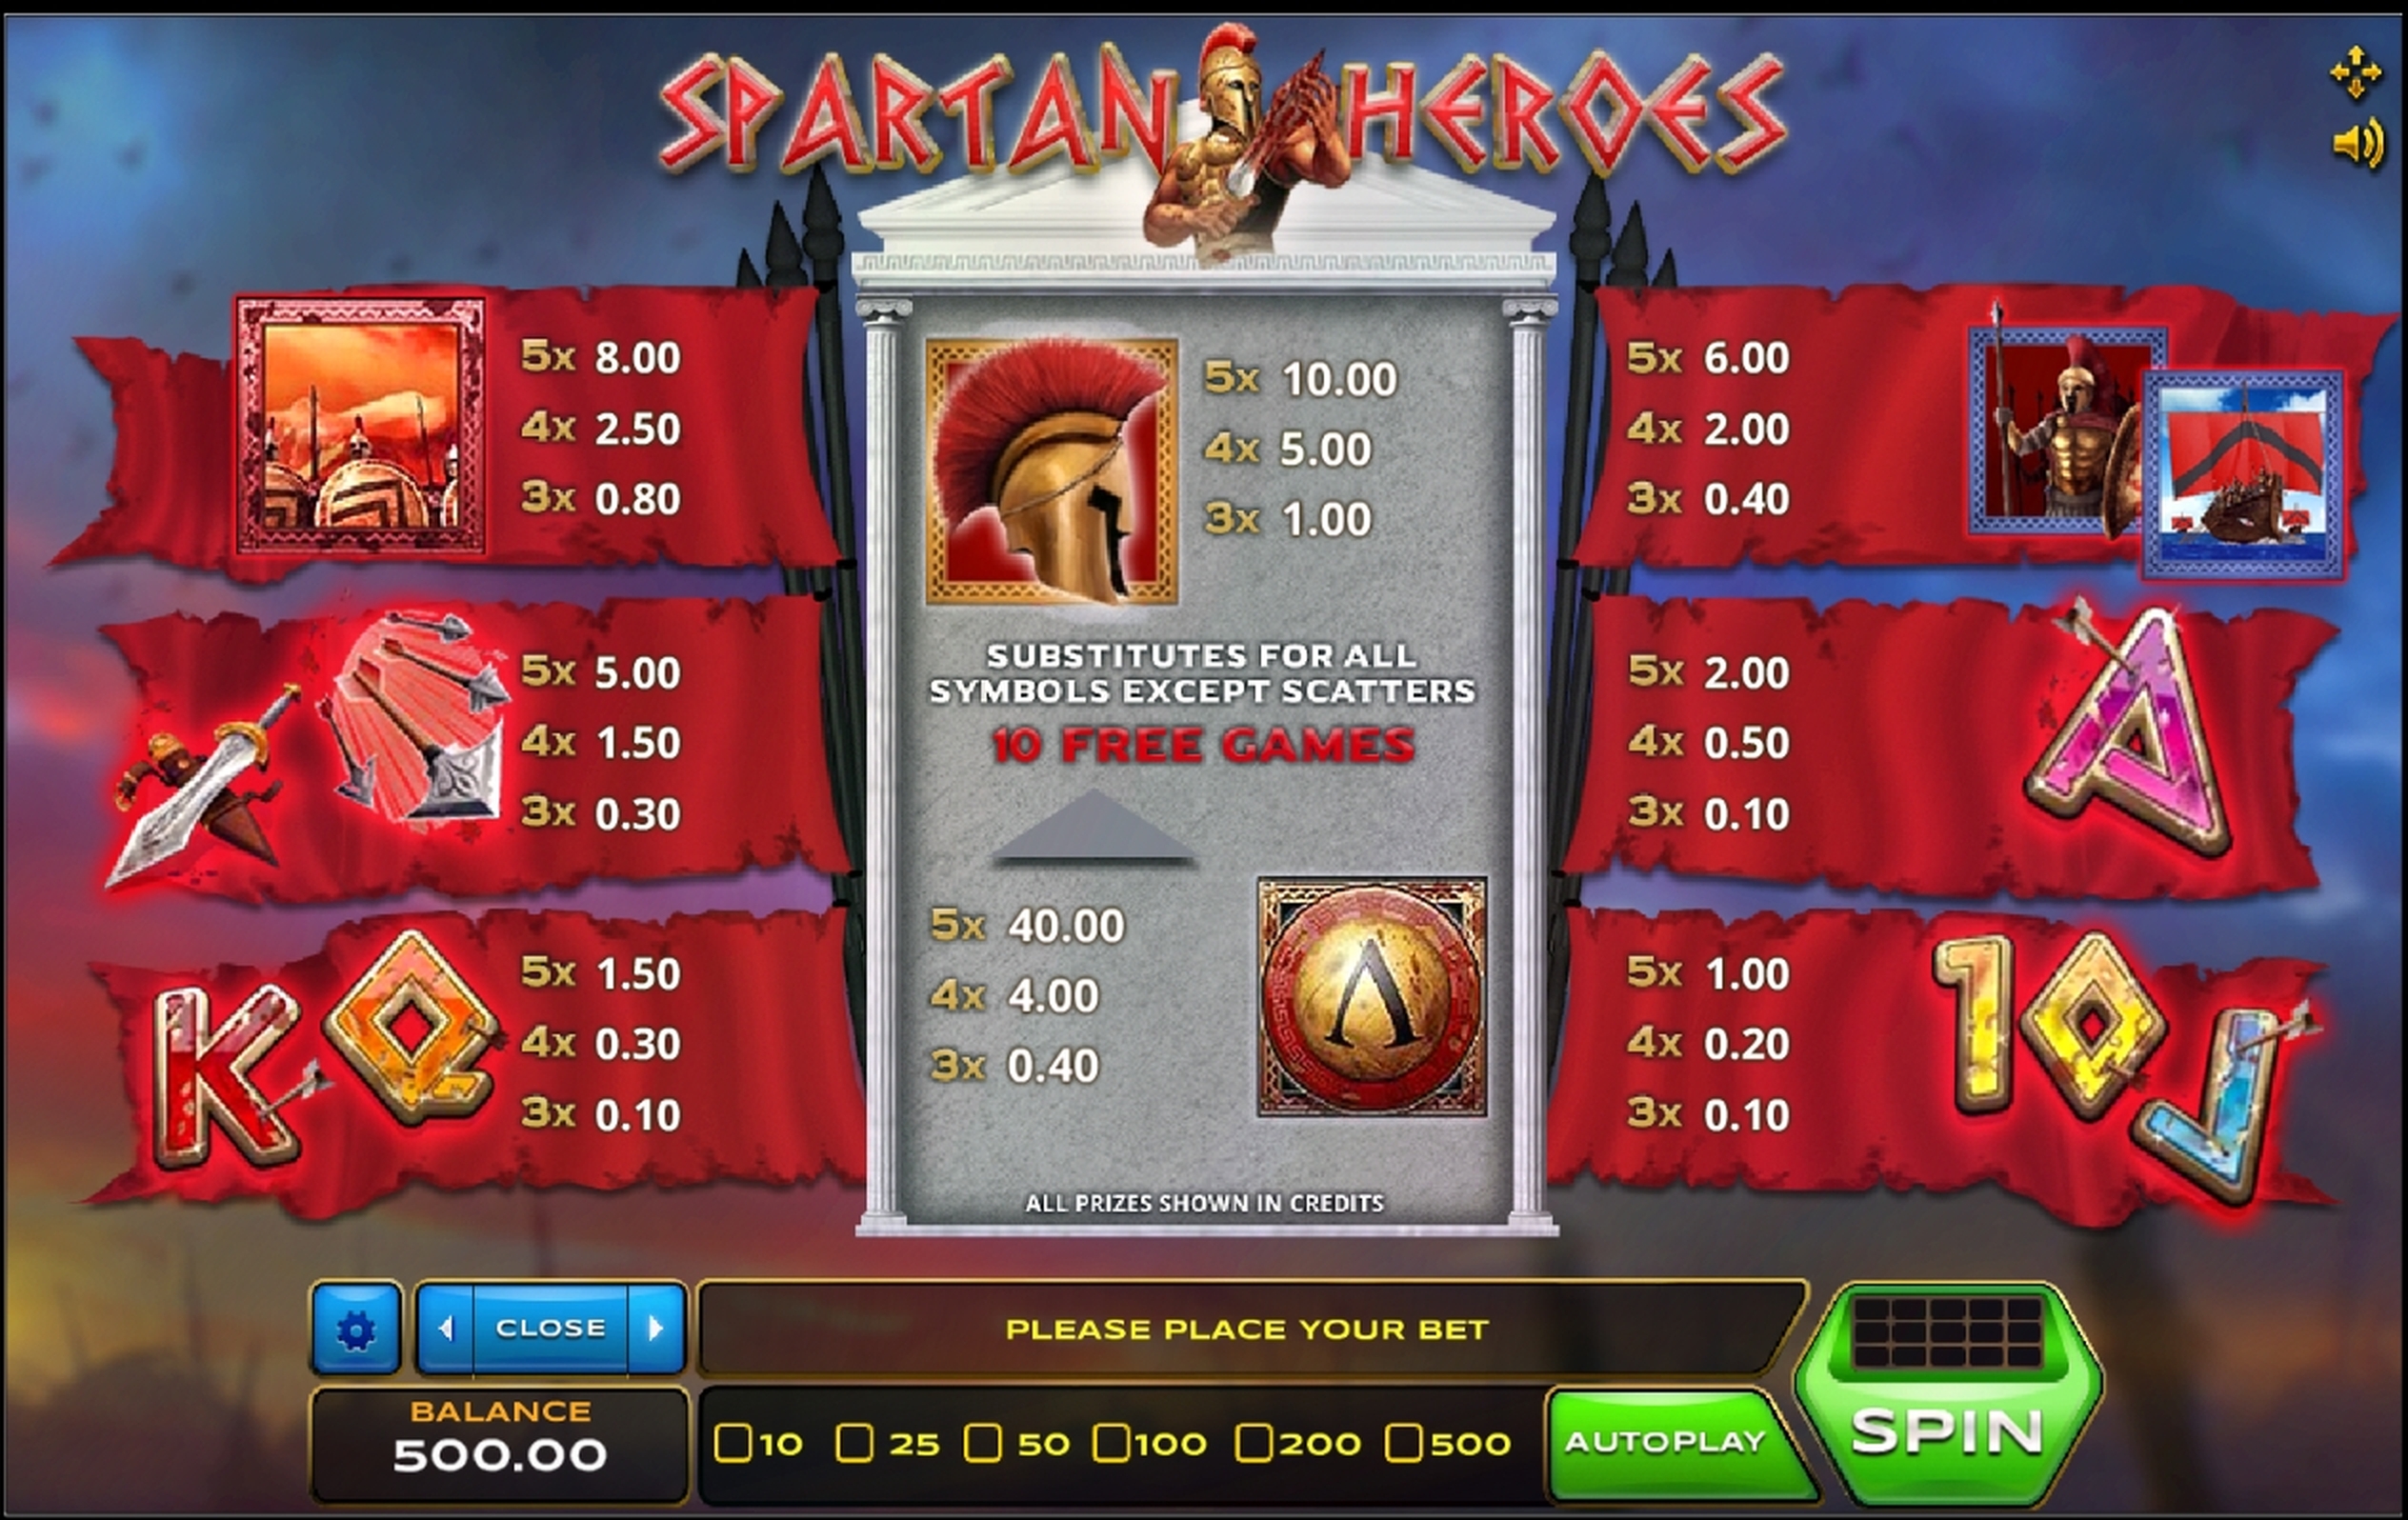 Info of Spartan Heroes Slot Game by Xplosive Slots Group